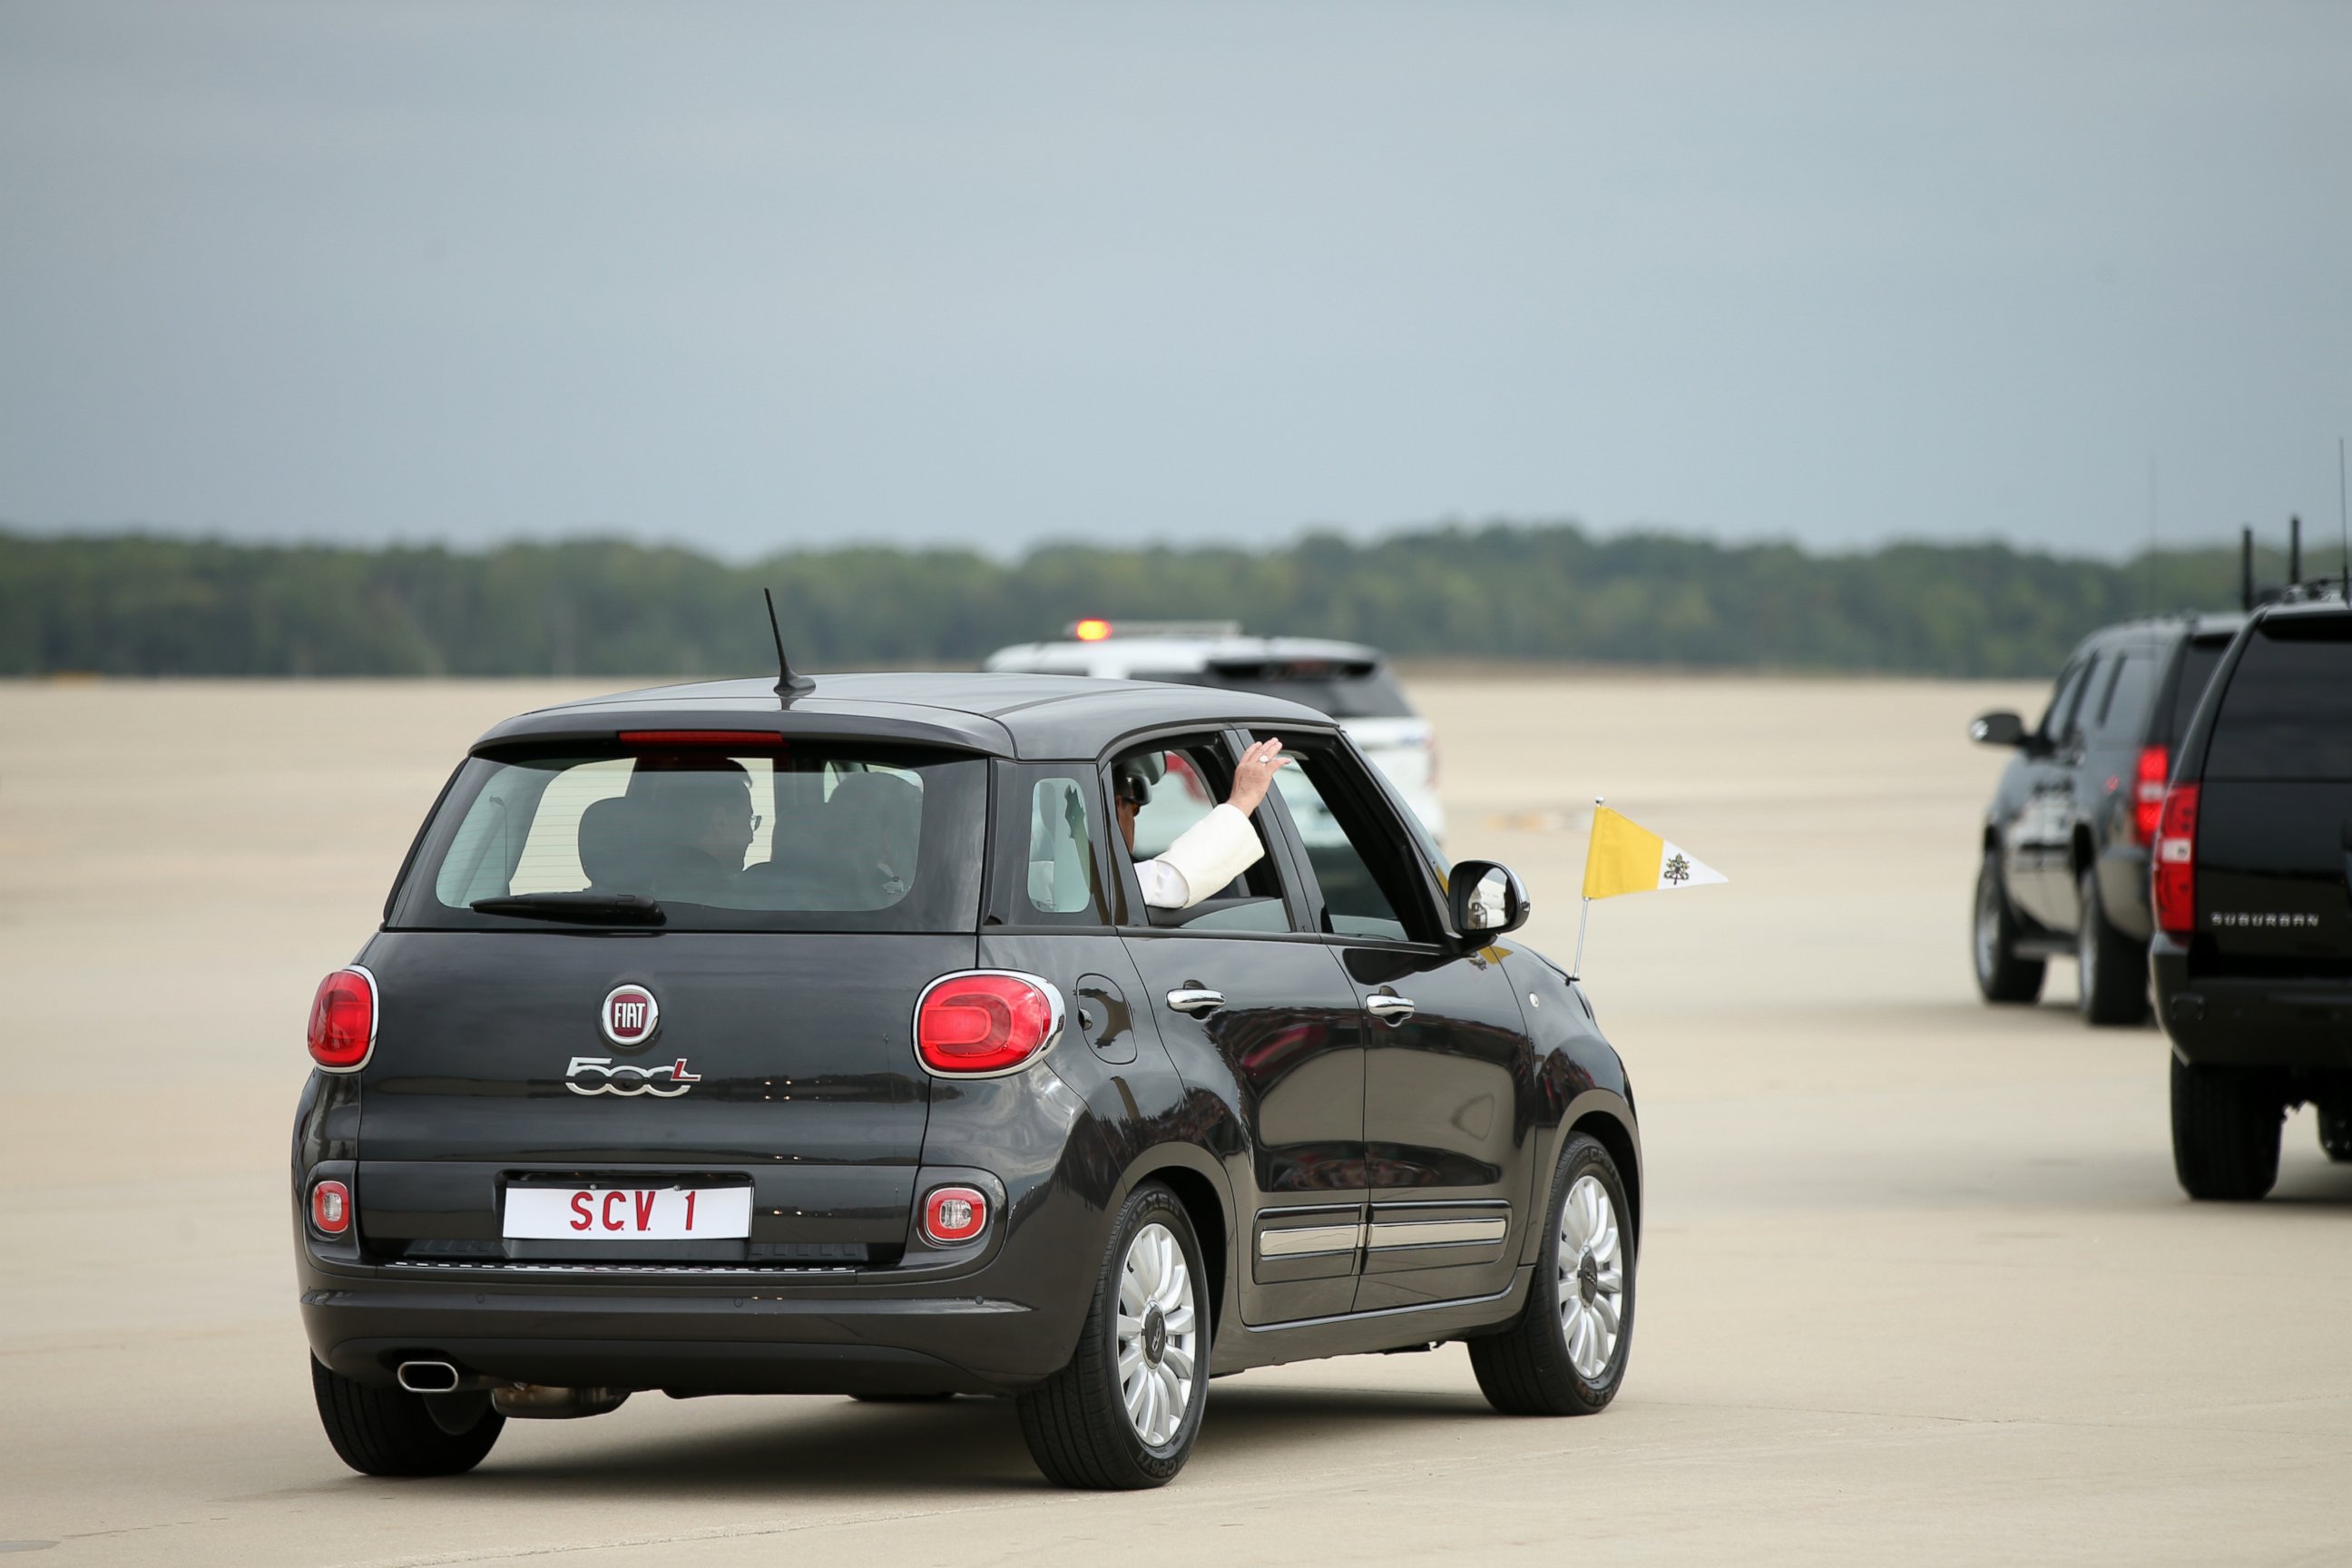 PHOTO: Pope Francis waves from a Fiat 500 as his motorcade departs from Andrews Air Force Base, Md., Sept. 22, 2015, where President and Mrs. Obama welcomed him.